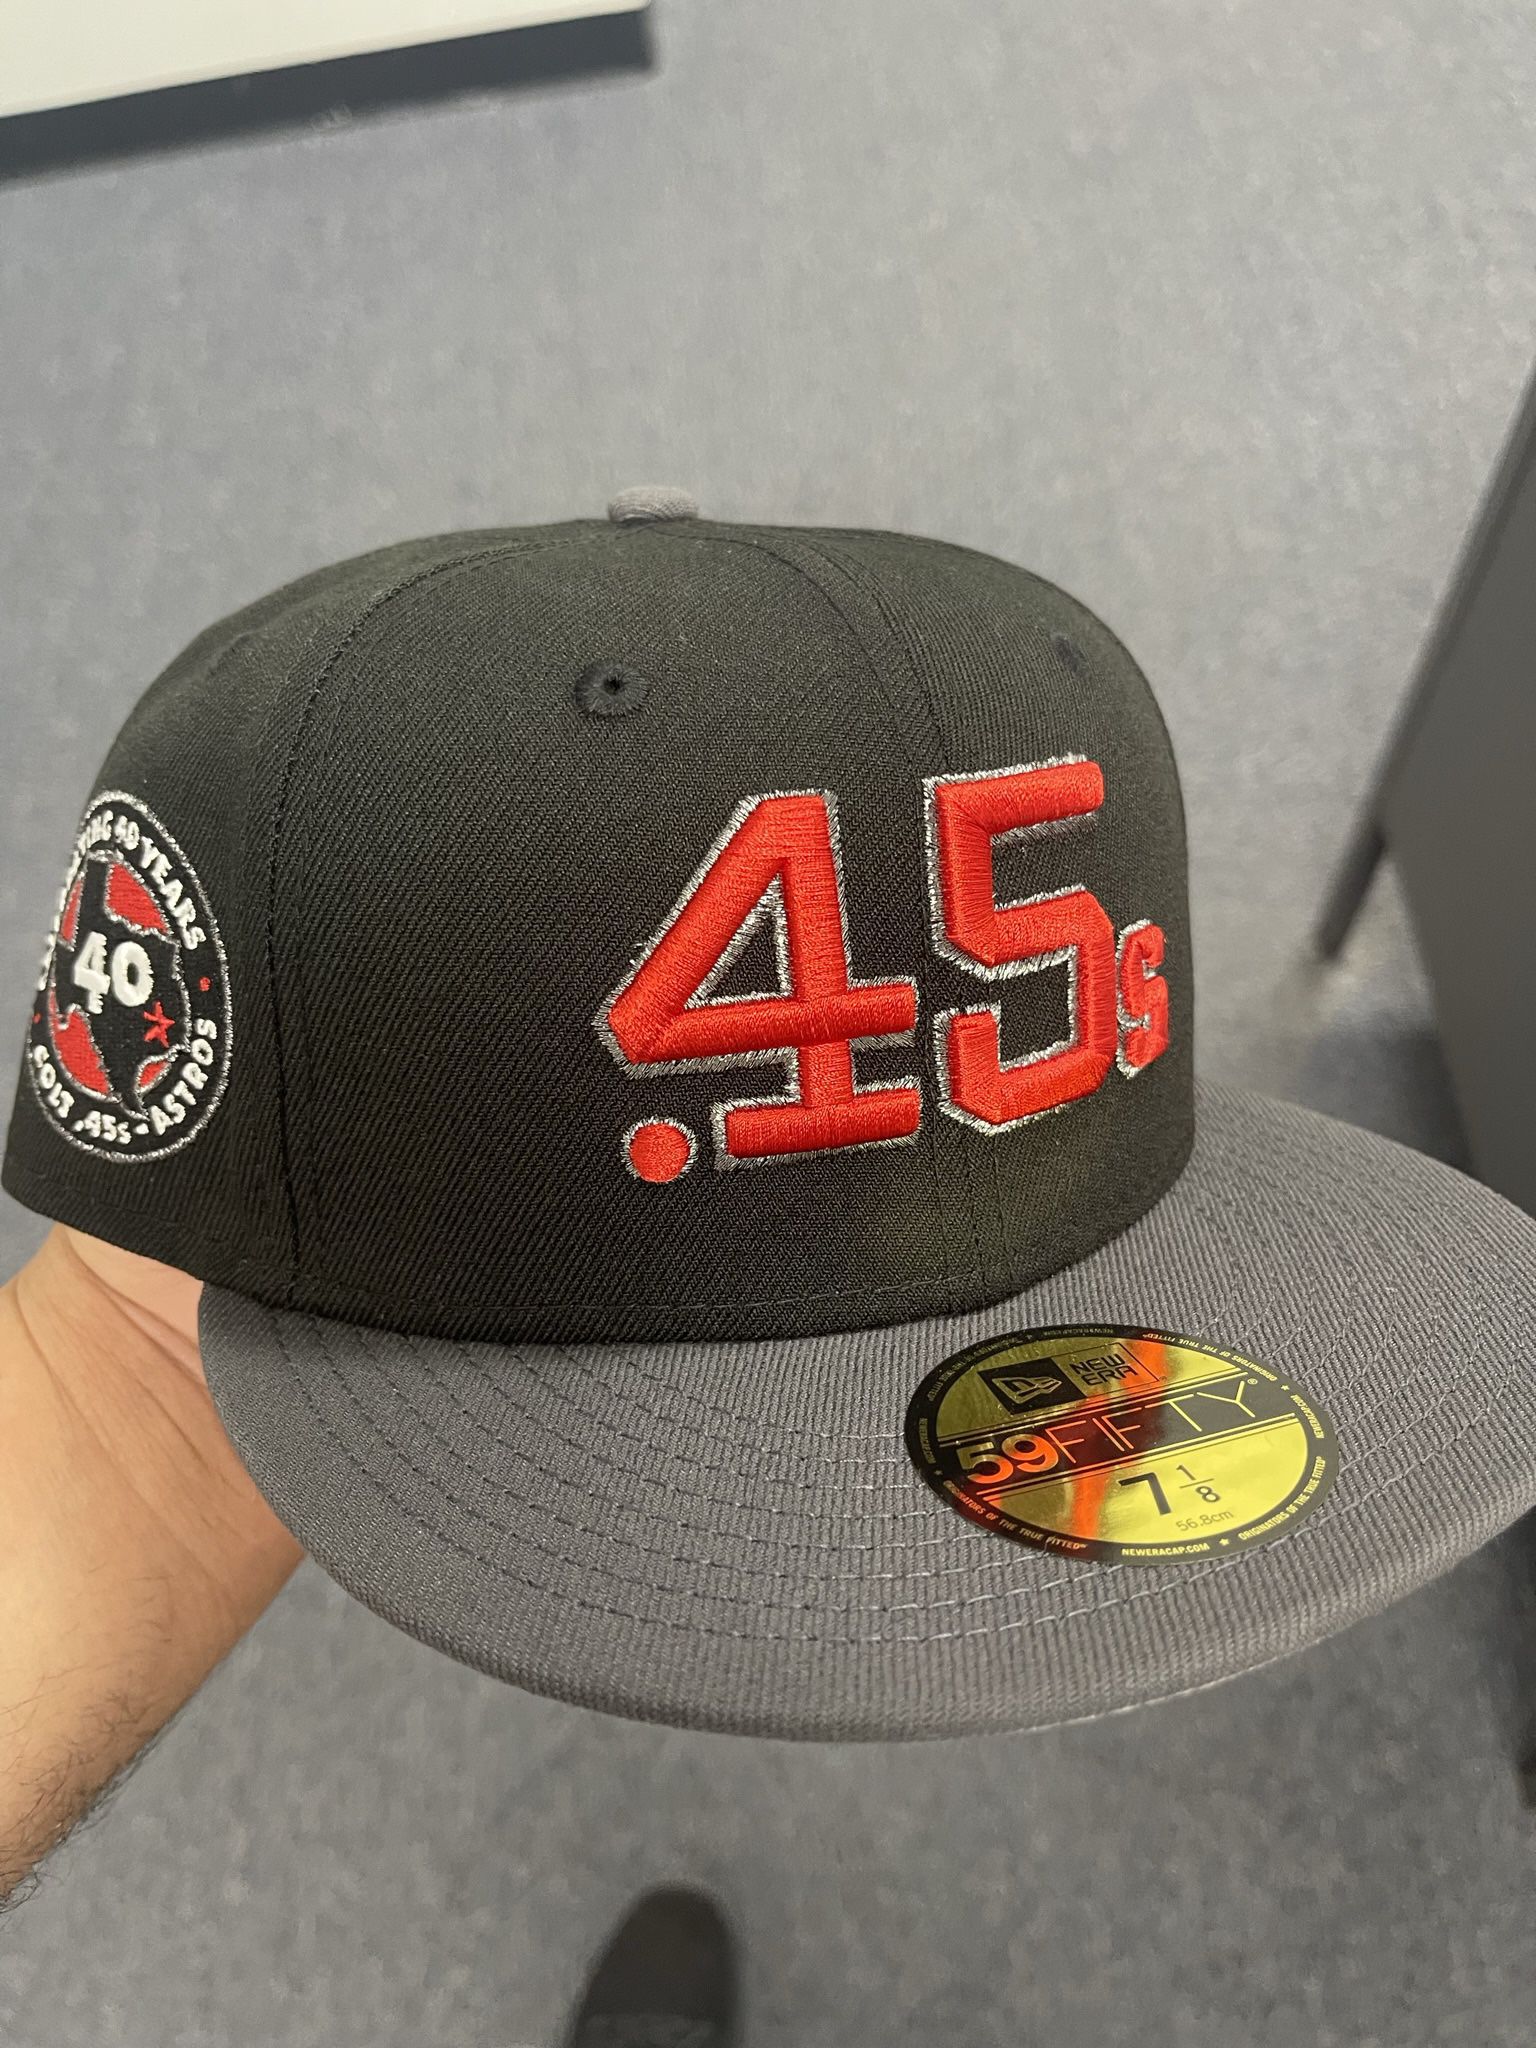 Houston Colt 45s Pink Bottom Hat 7 1/4 for Sale in Houston, TX - OfferUp